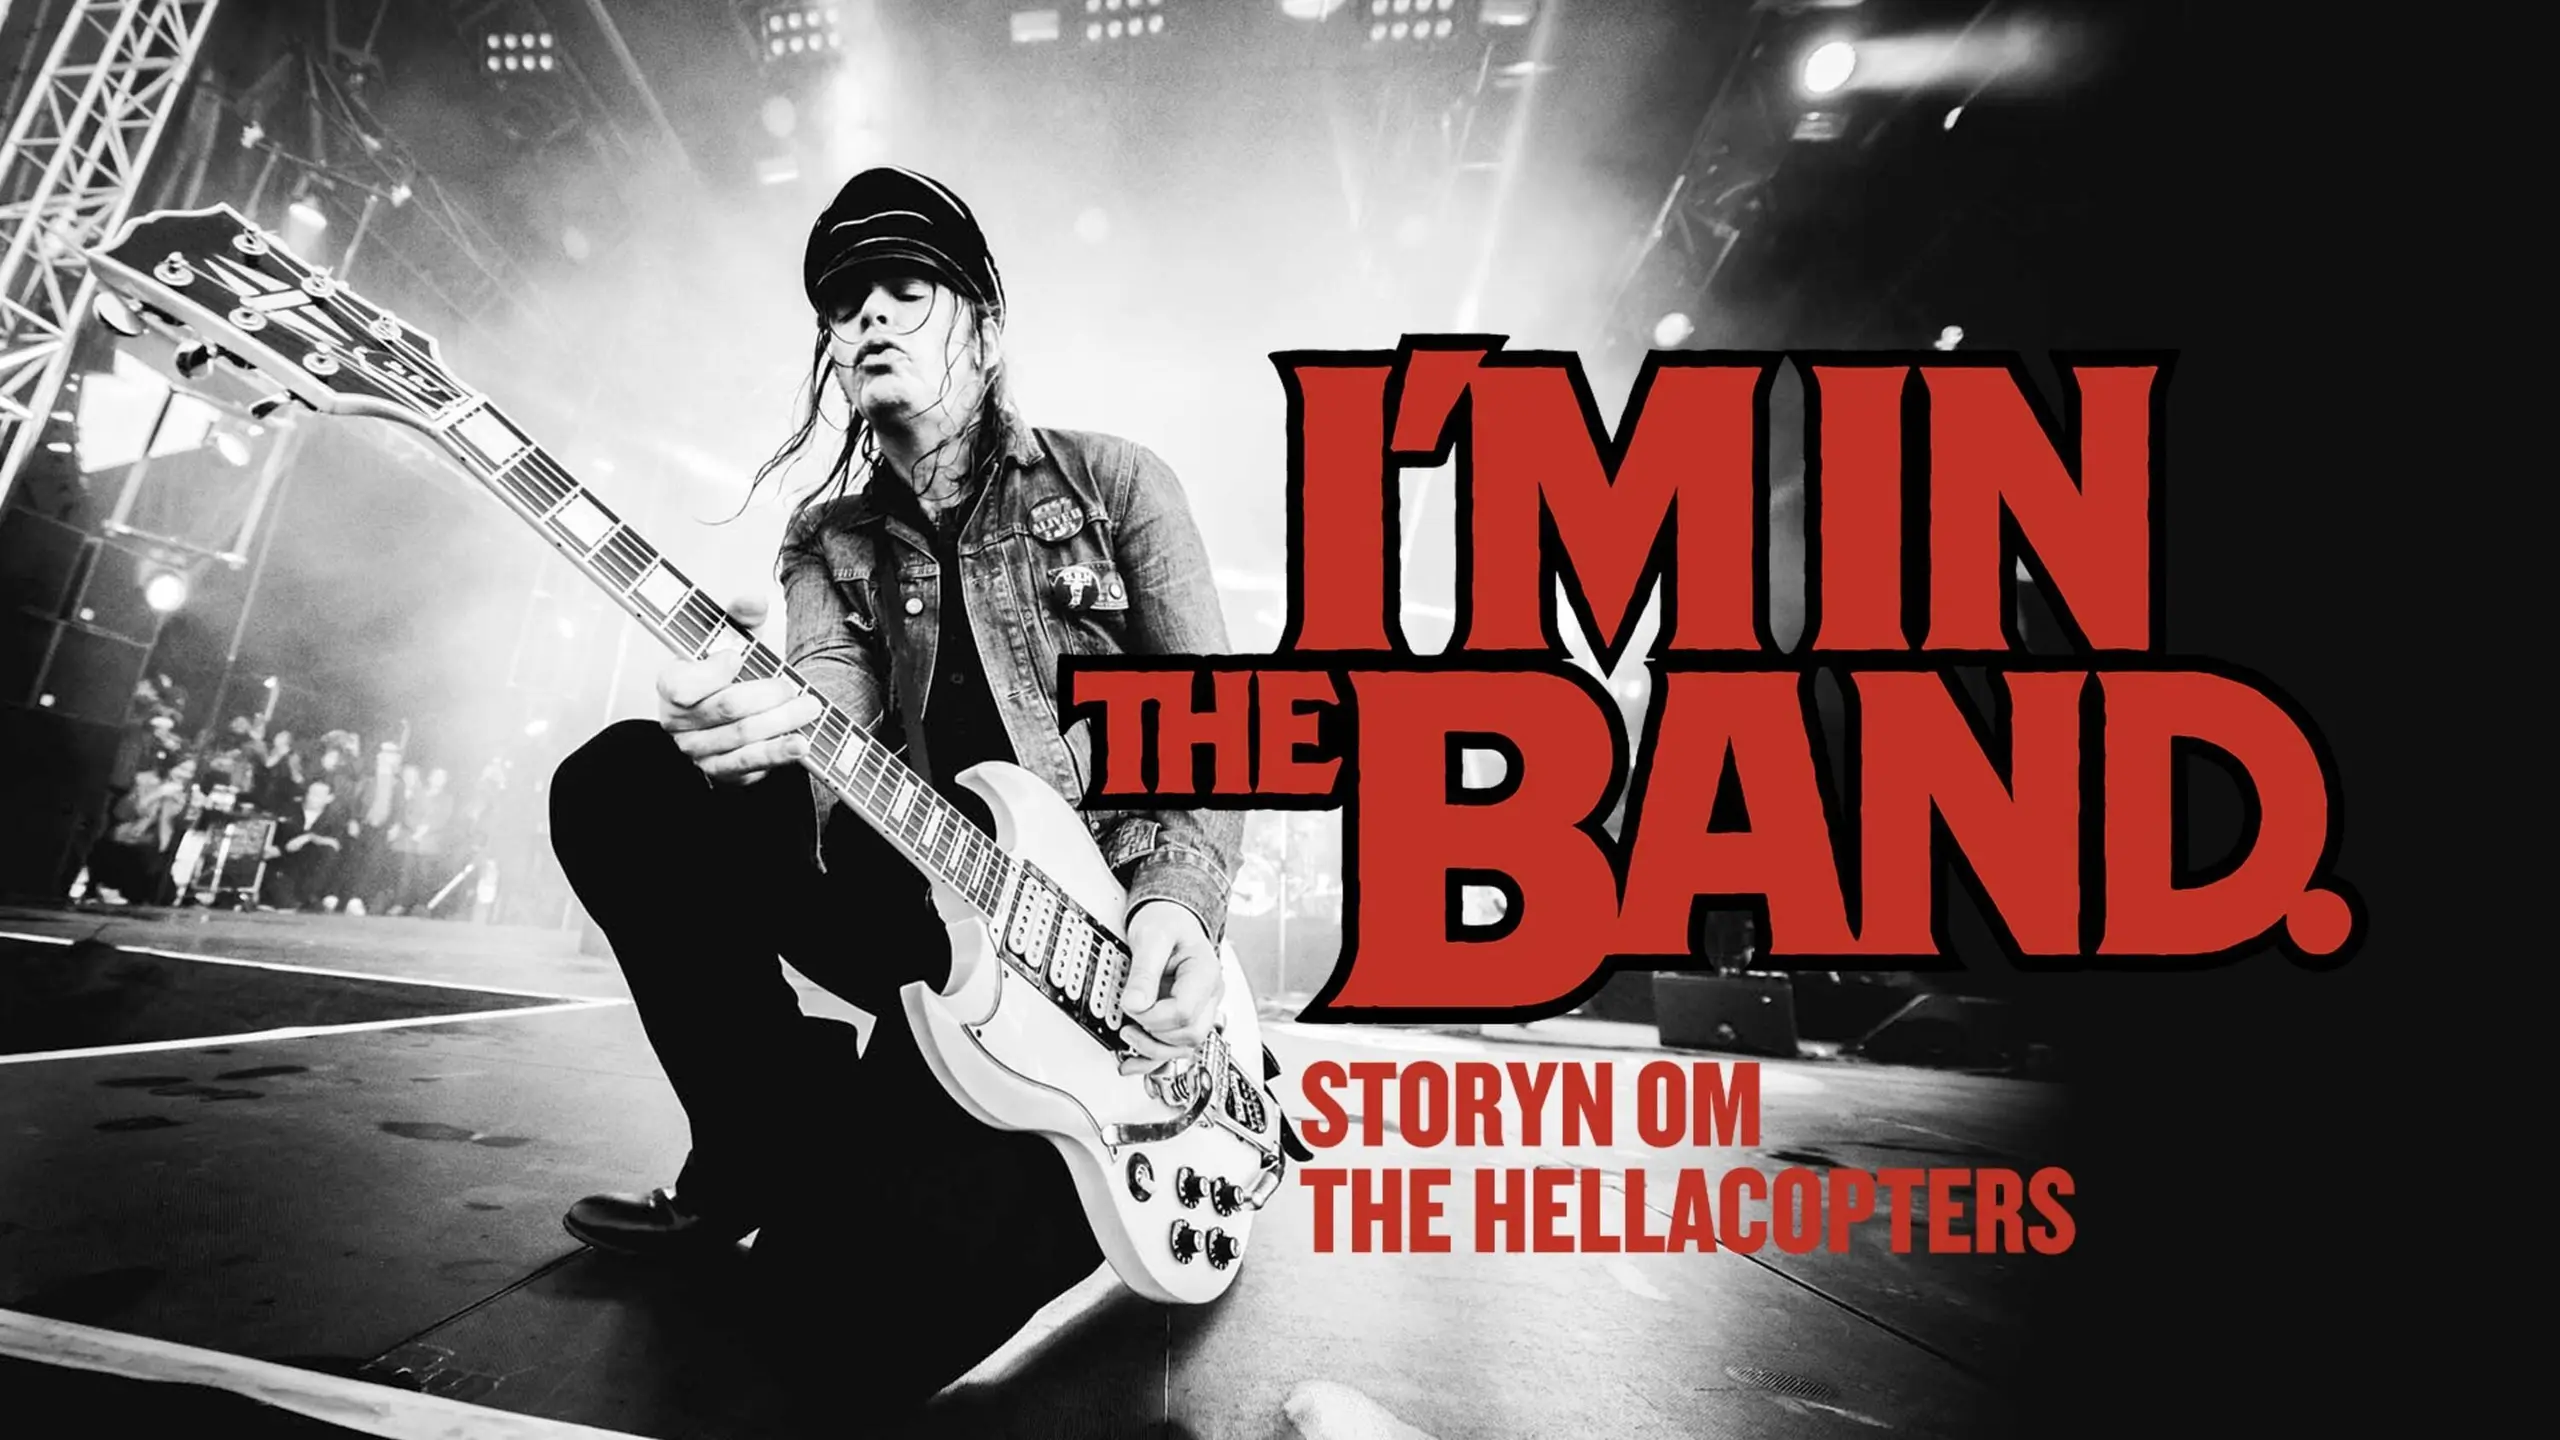 I'm in the Band – storyn om The Hellacopters